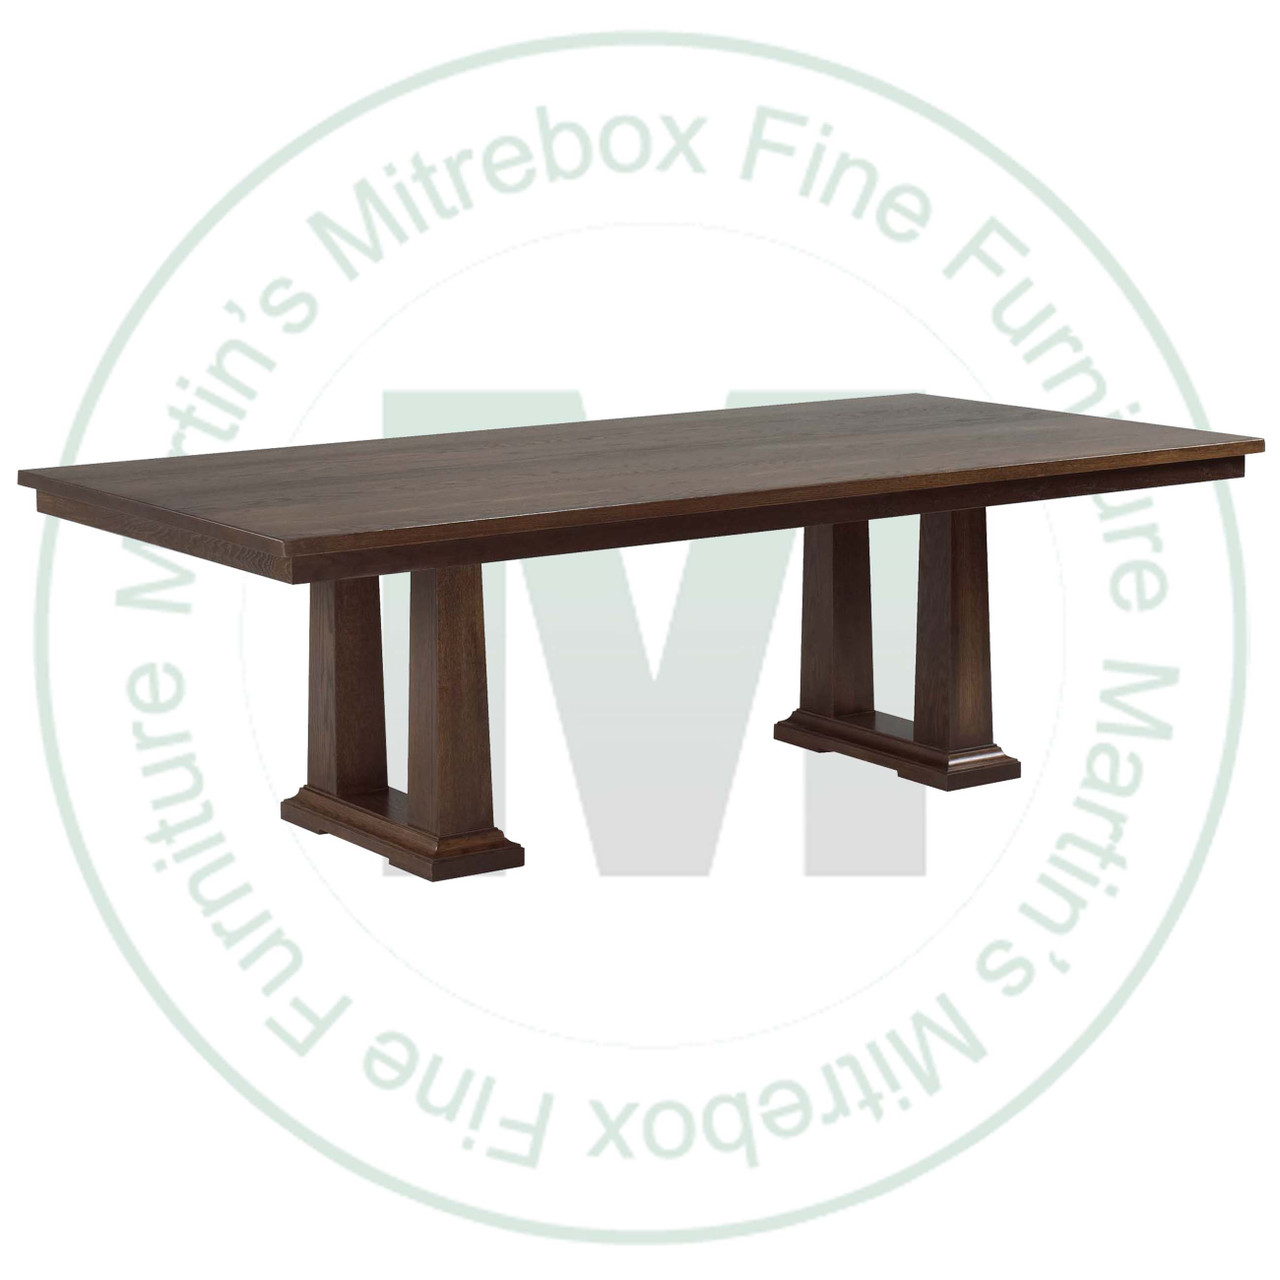 Oak Acropolis Extension Double Pedestal Table 48''D x 72''W x 30''H With 4 - 12'' Leaves Table Has 1.75'' Thick Top